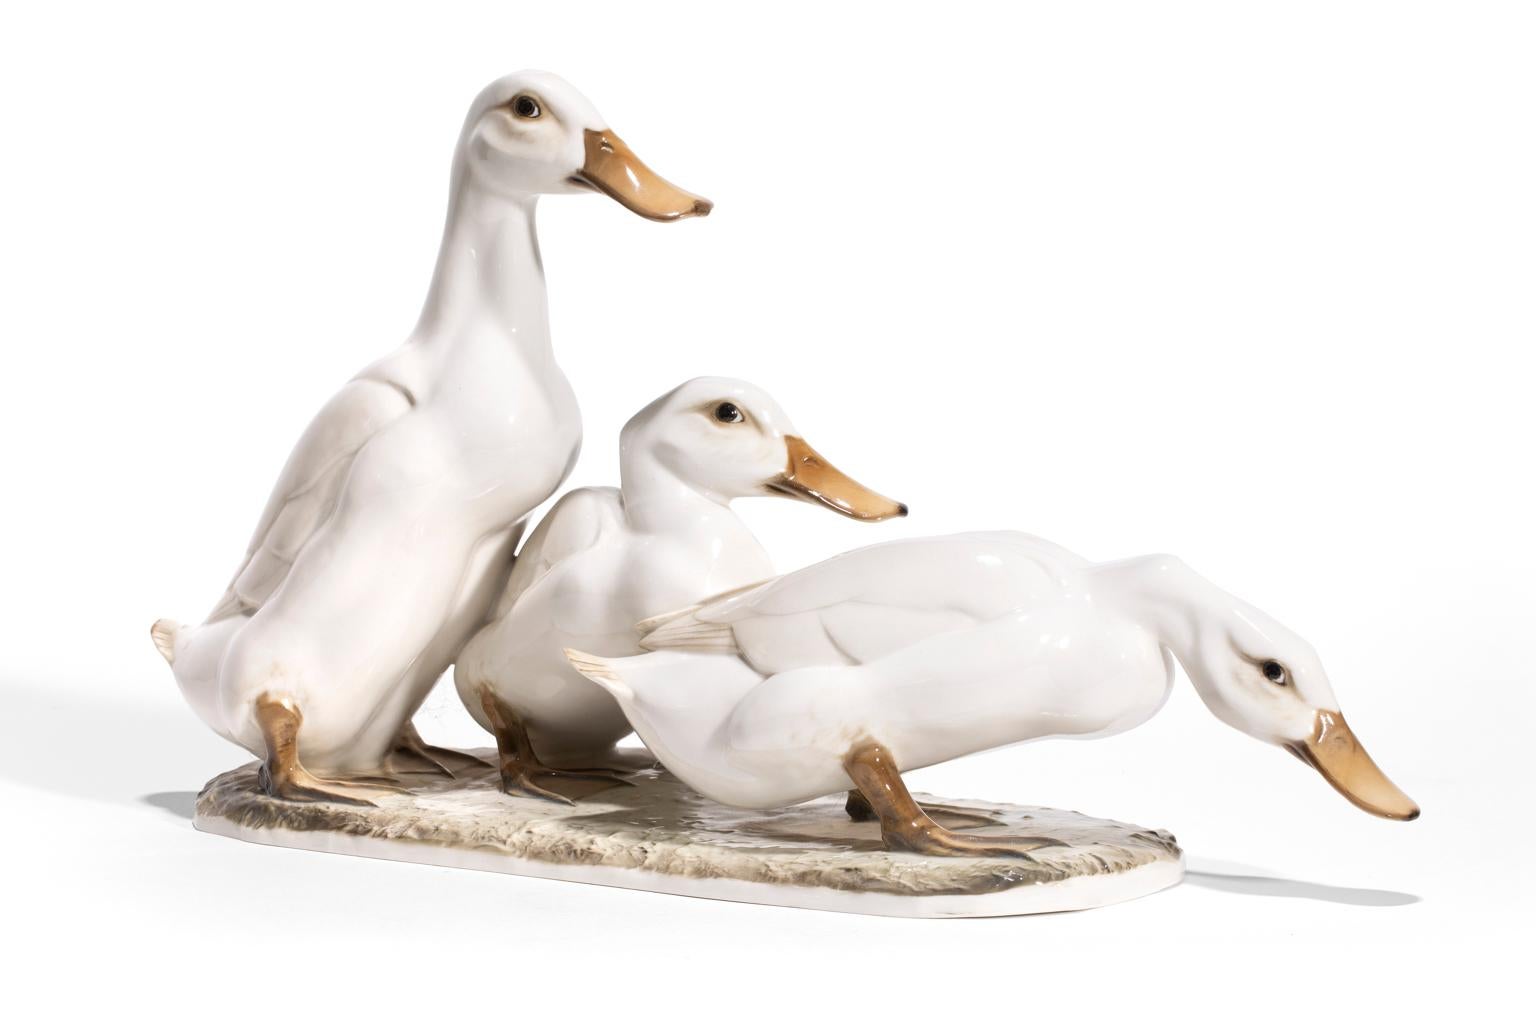 Three Ducks is a particular charming moment in time captured by the artist of this sculpture. Three ducks beautifully rendered, somewhat plump, and out for a walk perhaps at the edge of a pond and ready to jump in. It is a delicately handpainted